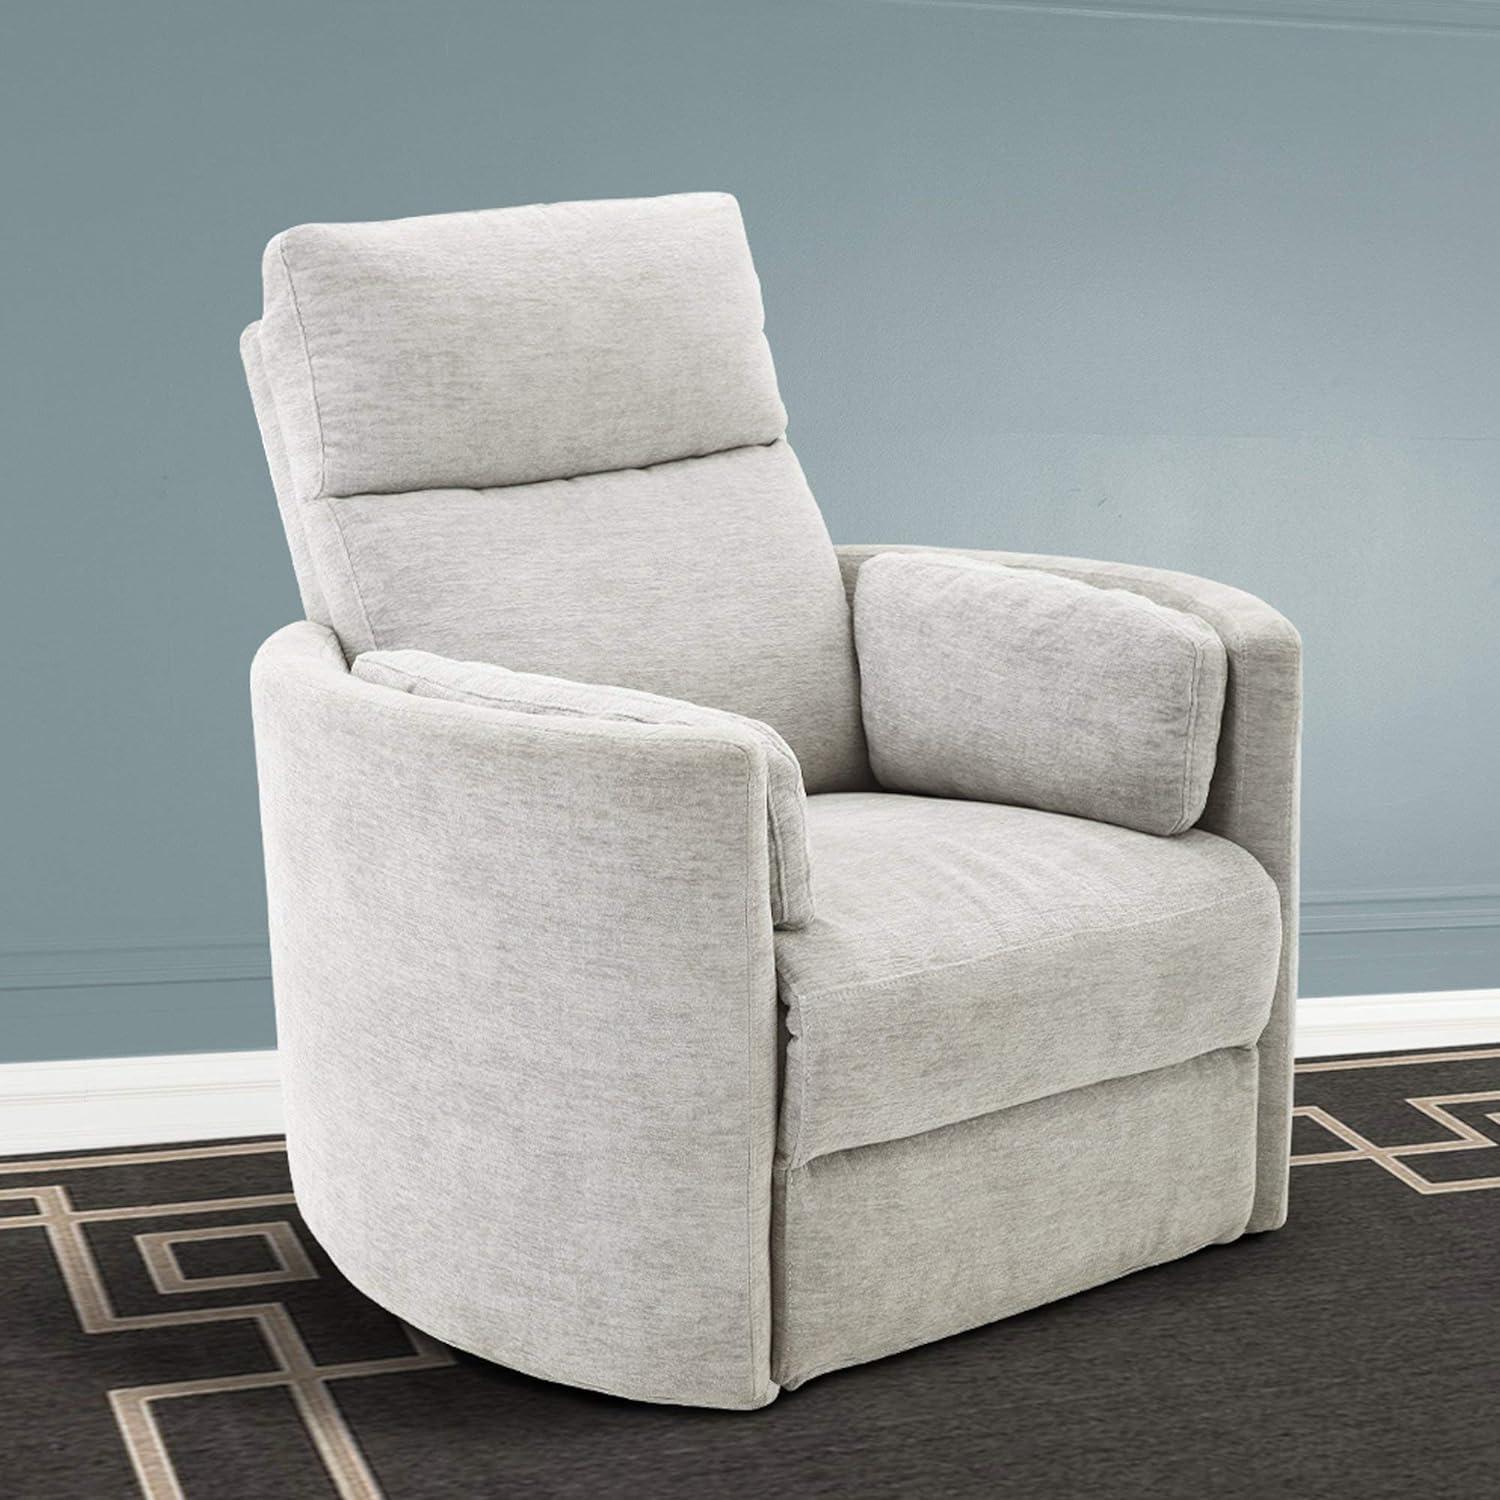 Cream Leather Swivel Glider Recliner with Wood Frame